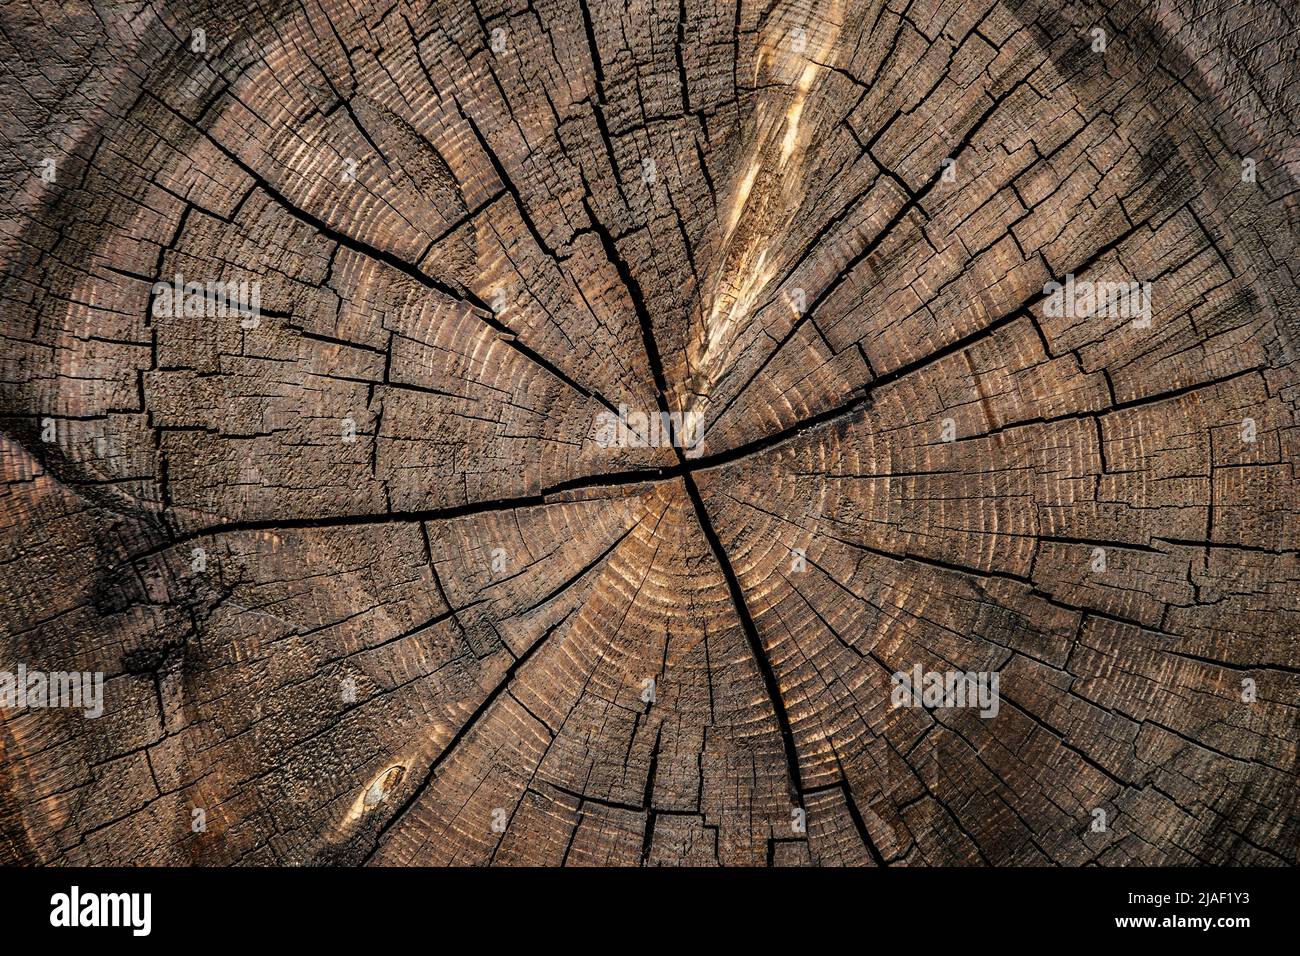 Closeup of old, worn, weathered section of wood with cracked annual growth rings pattern. Stock Photo